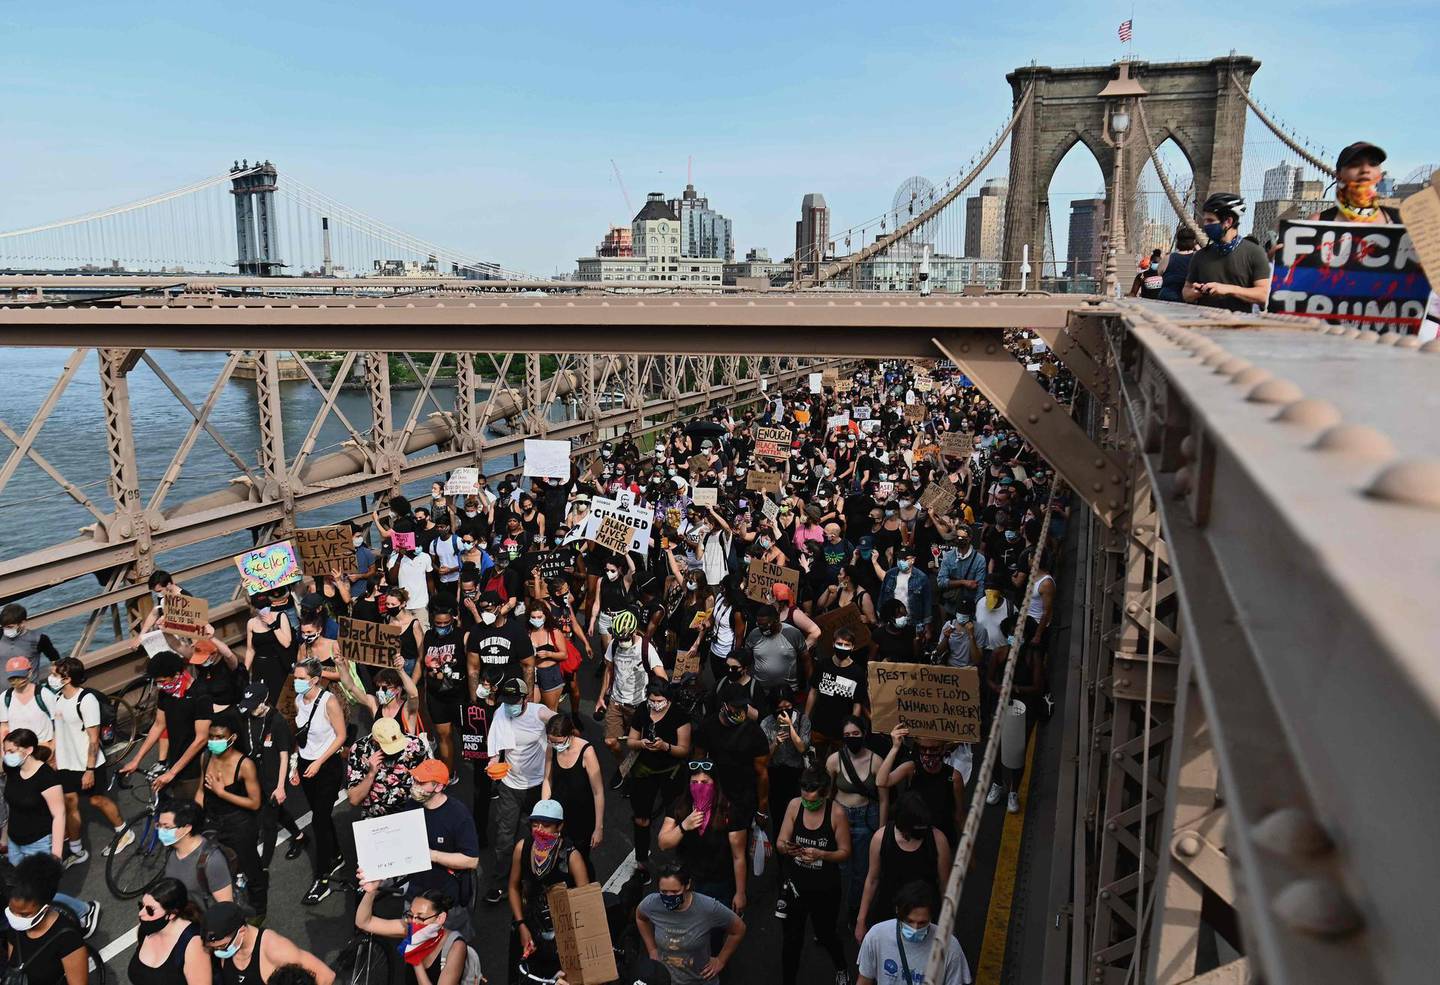 TOPSHOT - Thousands of protesters march over the Brooklyn Bridge to demonstrate against the death of George Floyd on June 4, 2020 in New York. On May 25, 2020, Floyd, a 46-year-old black man suspected of passing a counterfeit $20 bill, died in Minneapolis after Derek Chauvin, a white police officer, pressed his knee to Floyd's neck for almost nine minutes. / AFP / Angela Weiss
